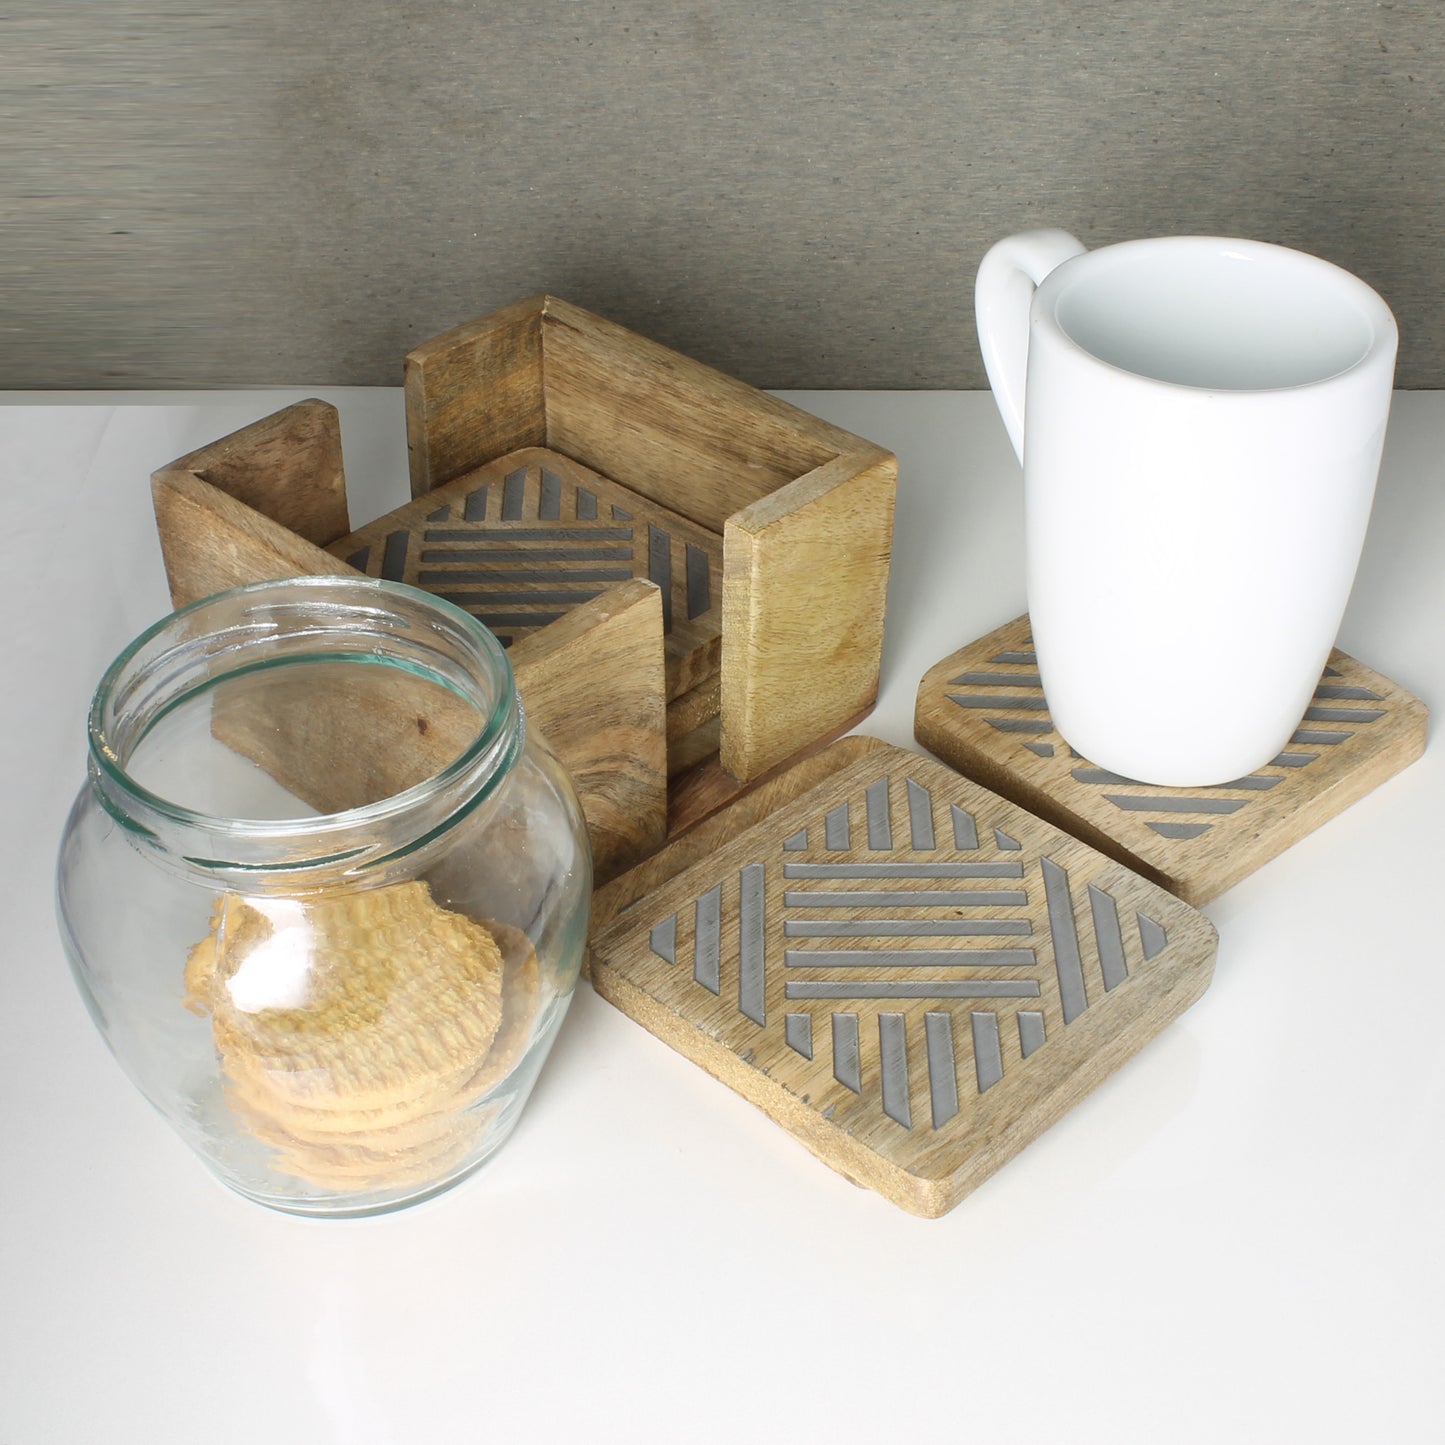 SAVON Wooden Coaster Set of 6 With Holder Square Geometric Lines Gray For Drinks Office Desk